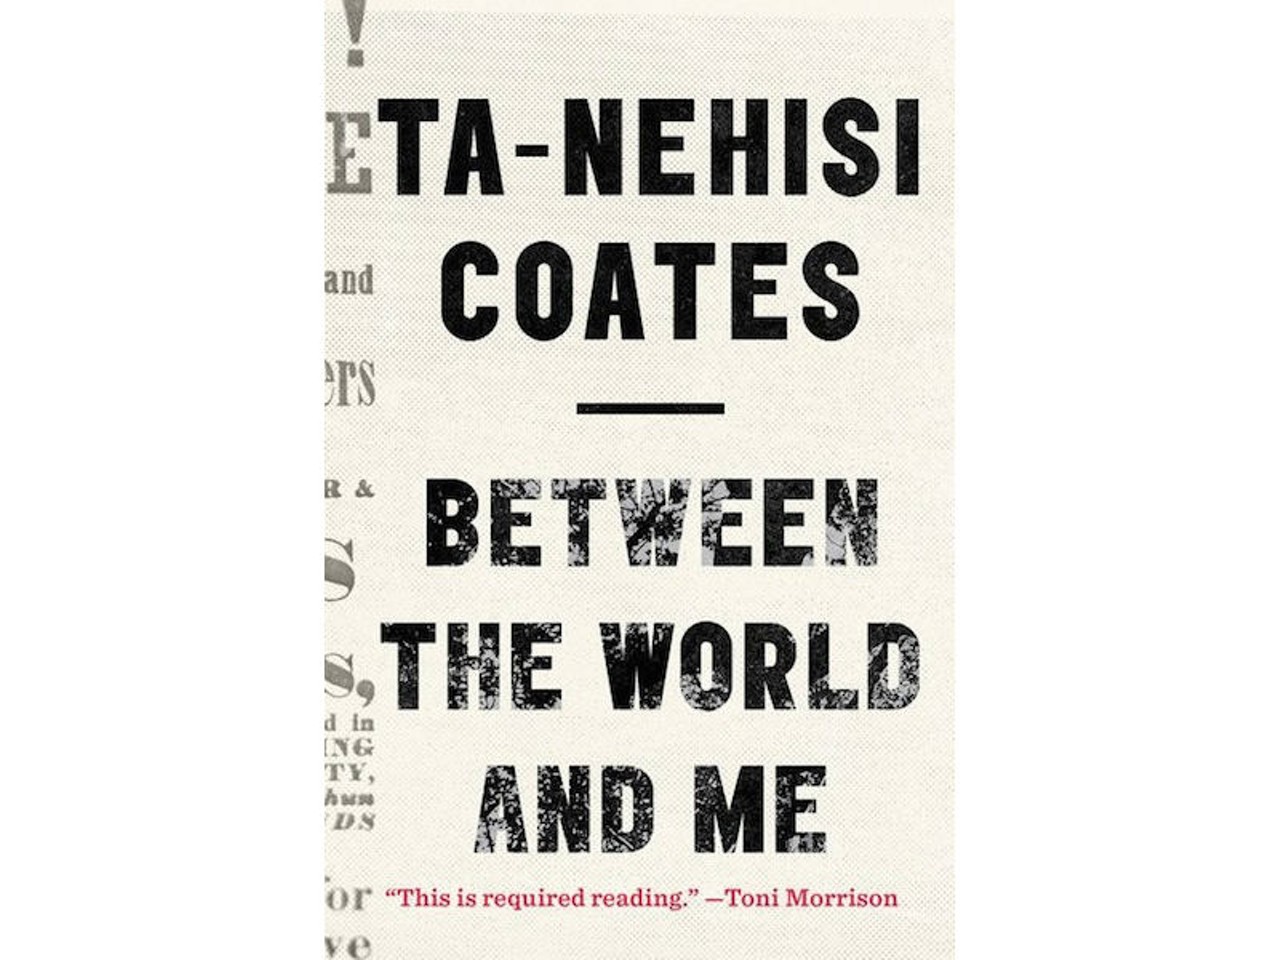 Between the World and Me, memoir by Ta-Nehisi Coates (Spiegel & Grau, 163 pages)
From growing up in Baltimore, where religion and school offered no more solace than the streets, to finding his intellectual footing at Howard University, Coates weaves an unflinching examination of our country&#146;s racist tradition with the story of his coming-of-age and lifelong intellectual journey. &#151;RR